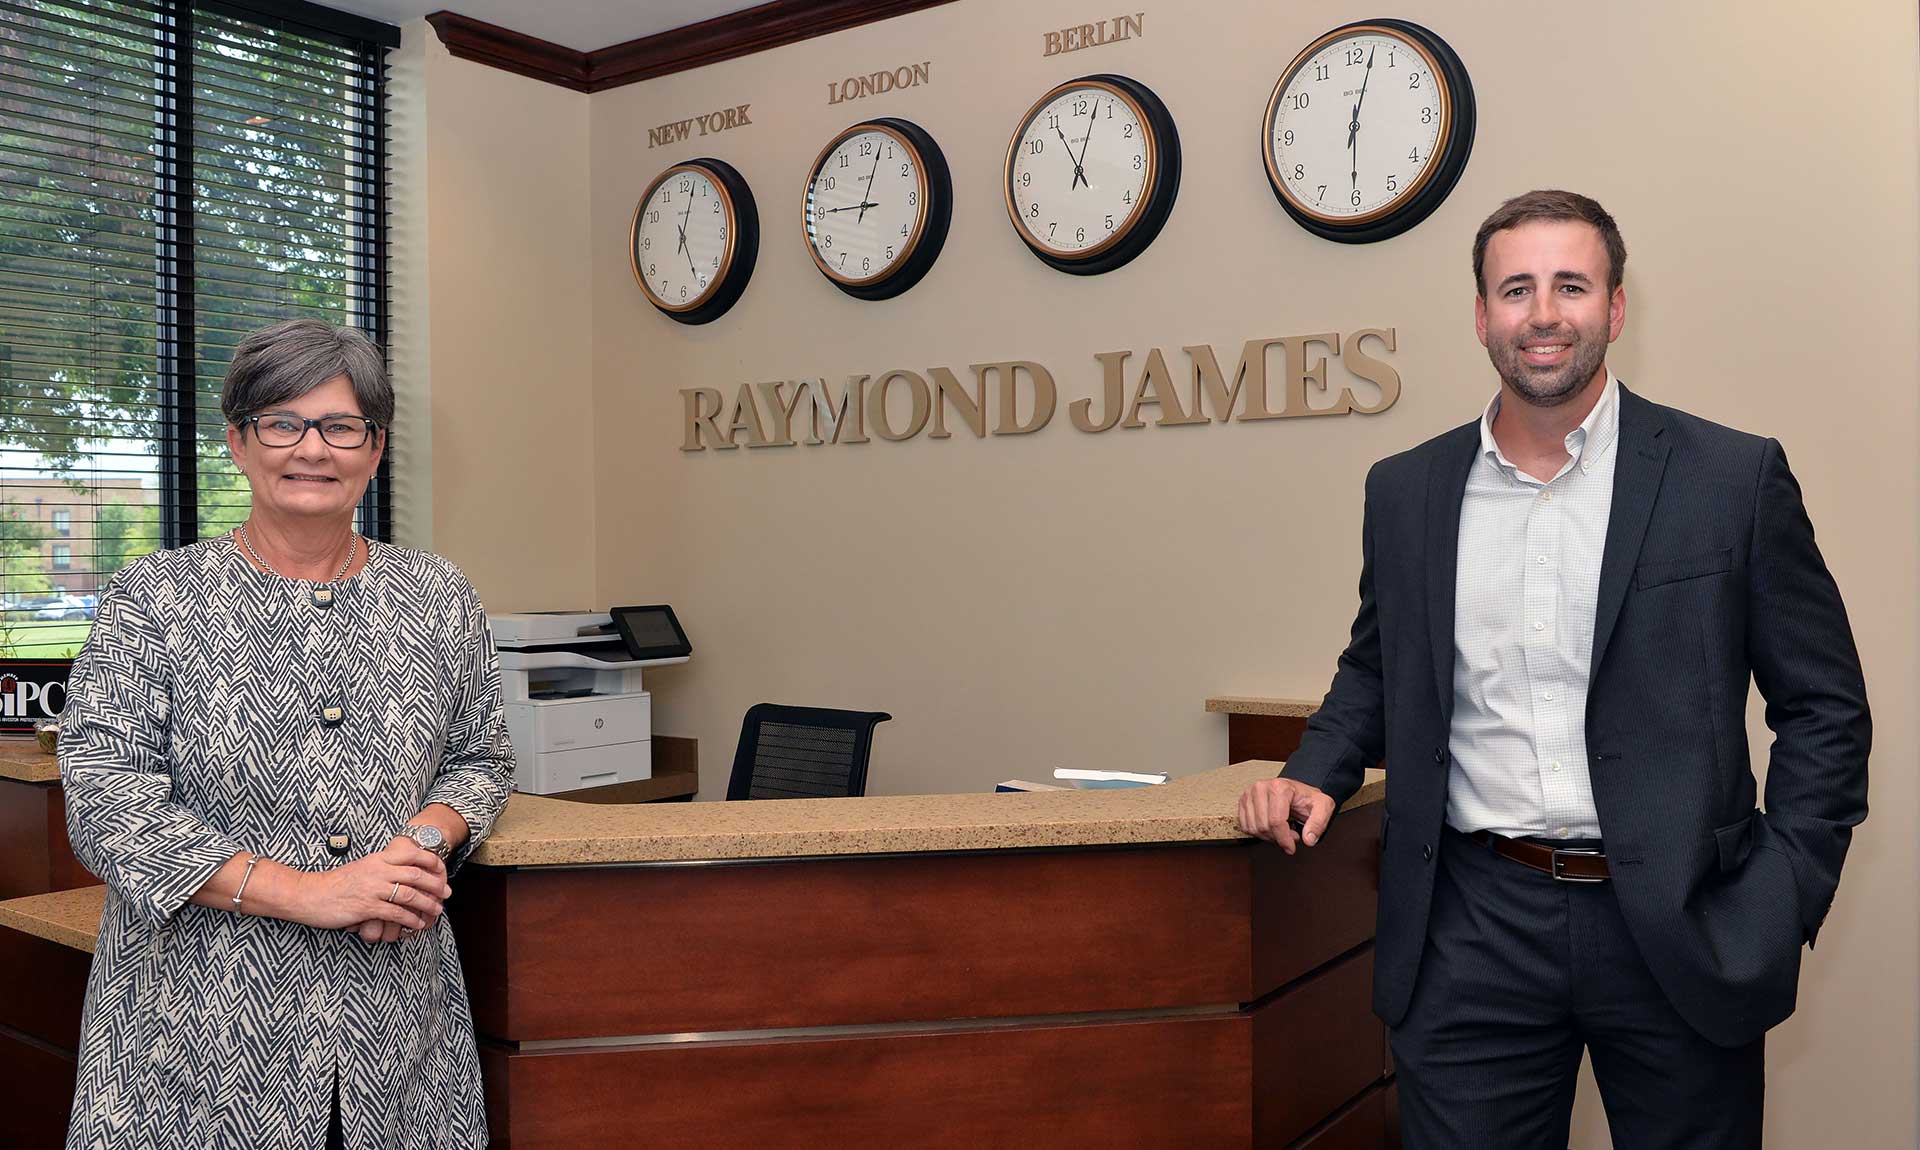 Gary and Nancy in front of Raymond James sign and Clocks